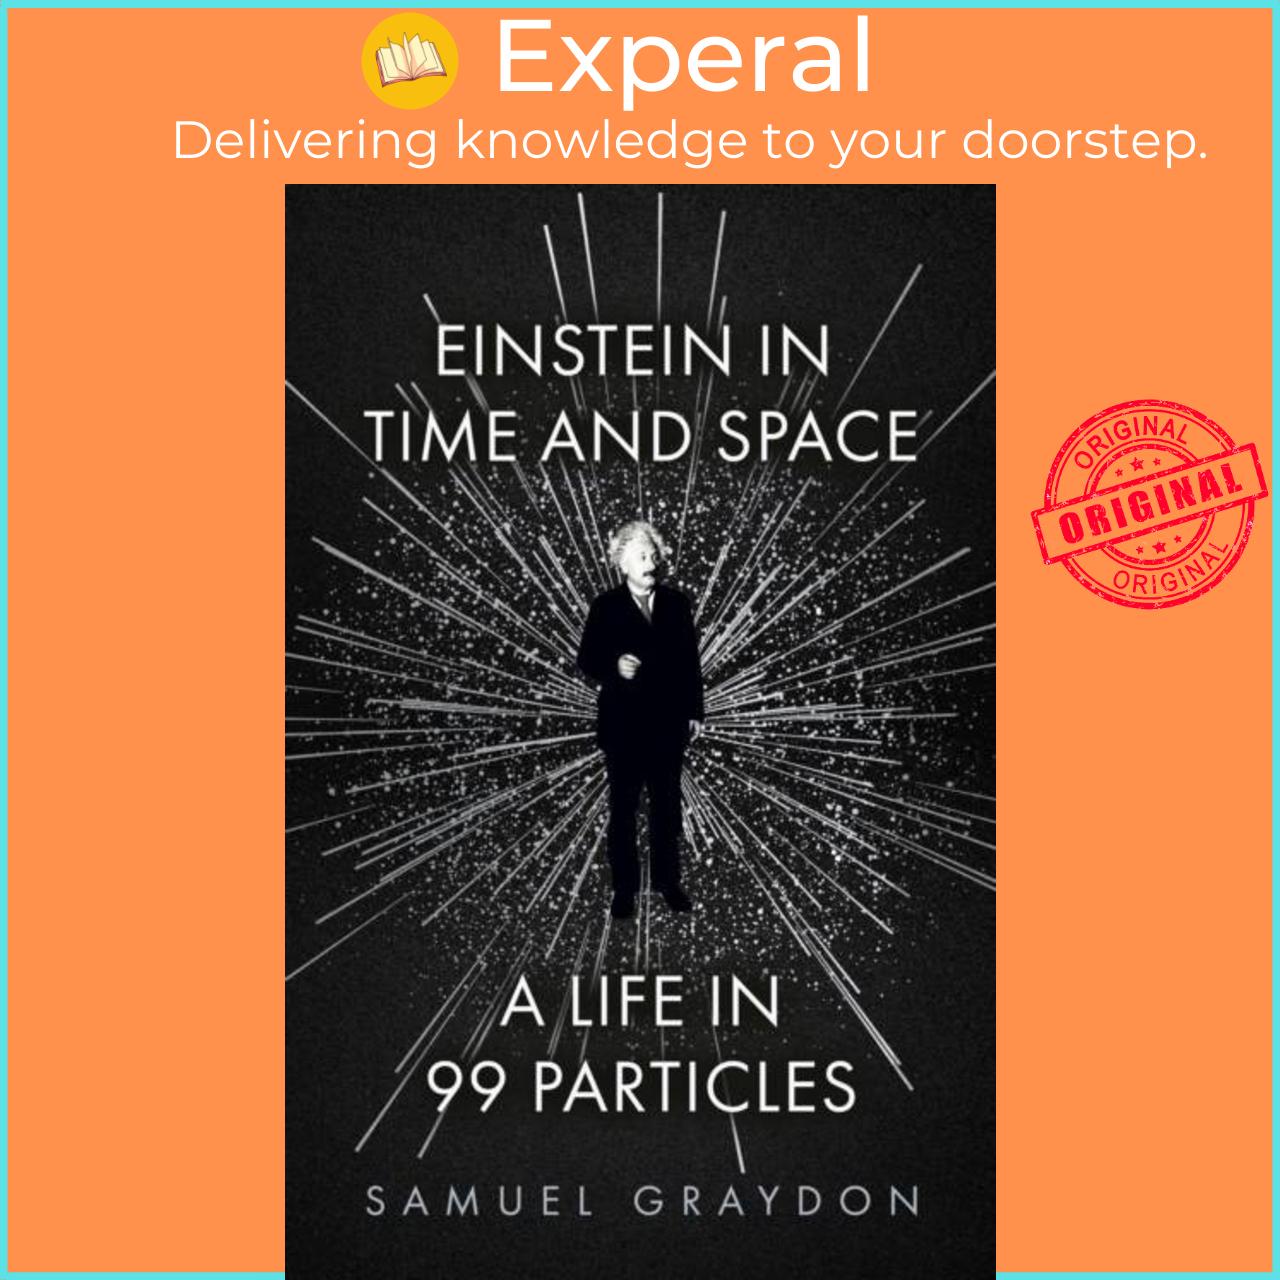 Sách - Einstein in Time and Space - A Life in 99 Particles by Samuel Graydon (UK edition, hardcover)